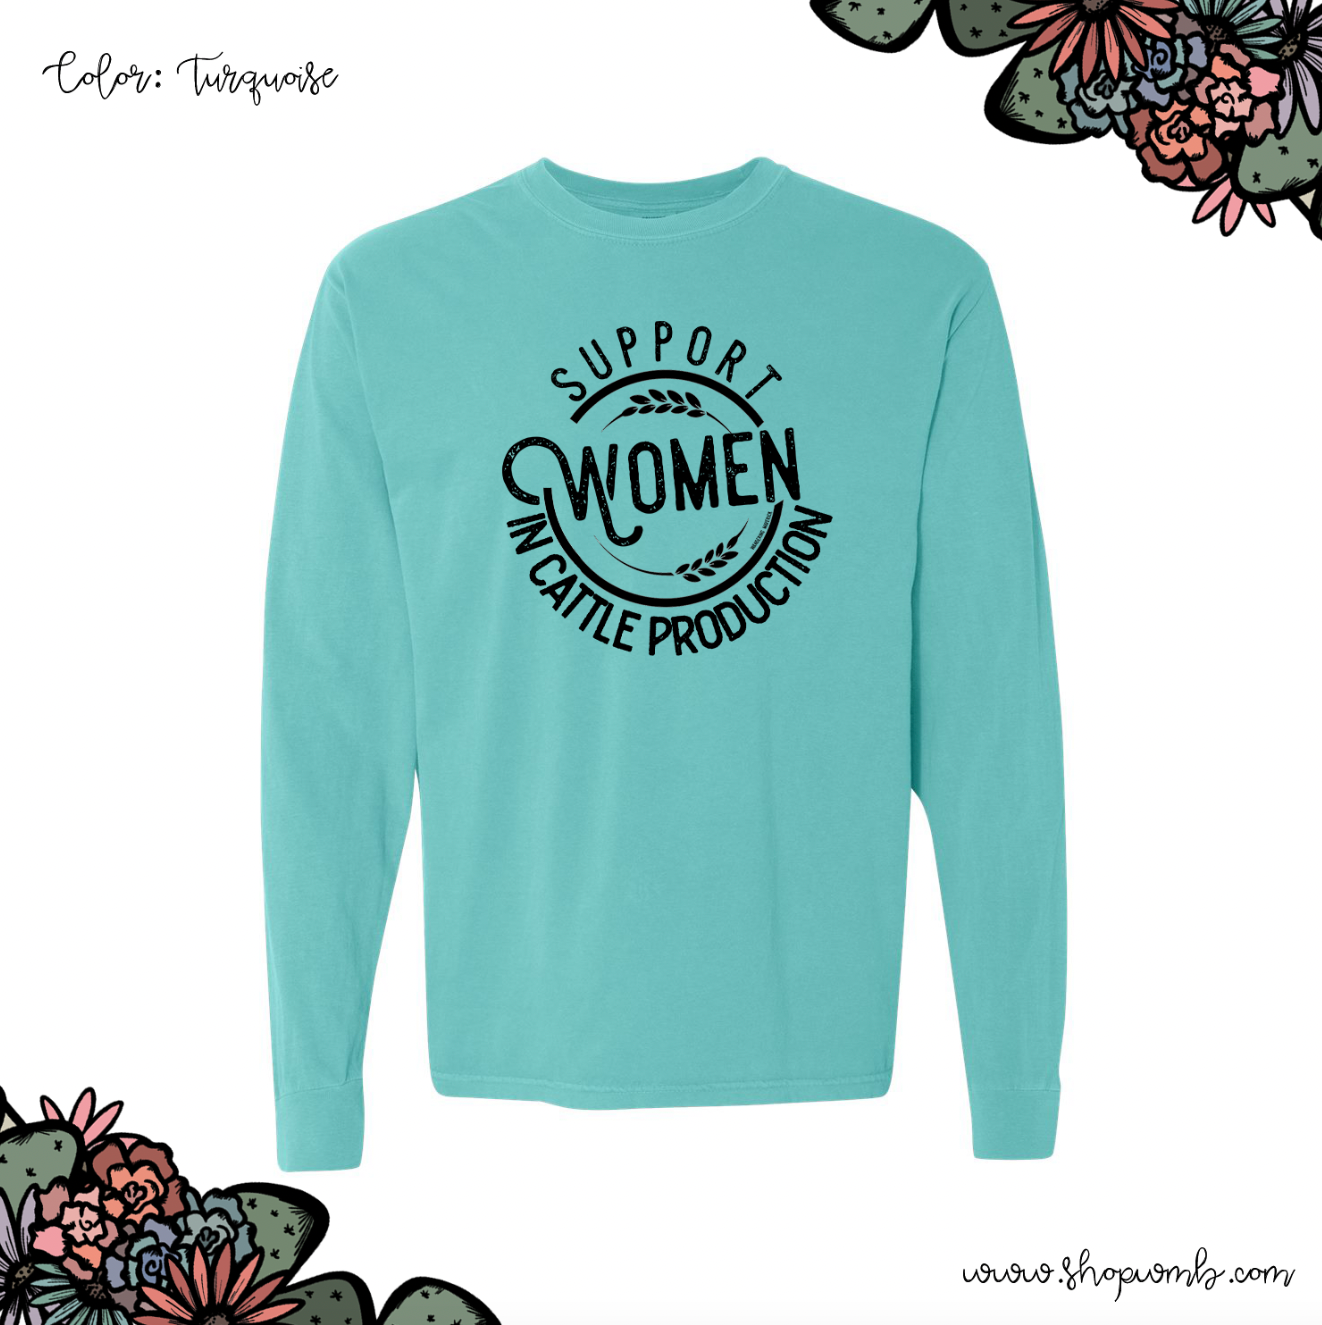 Support Women In Cattle Production LONG SLEEVE T-Shirt (S-3XL) - Multiple Colors!